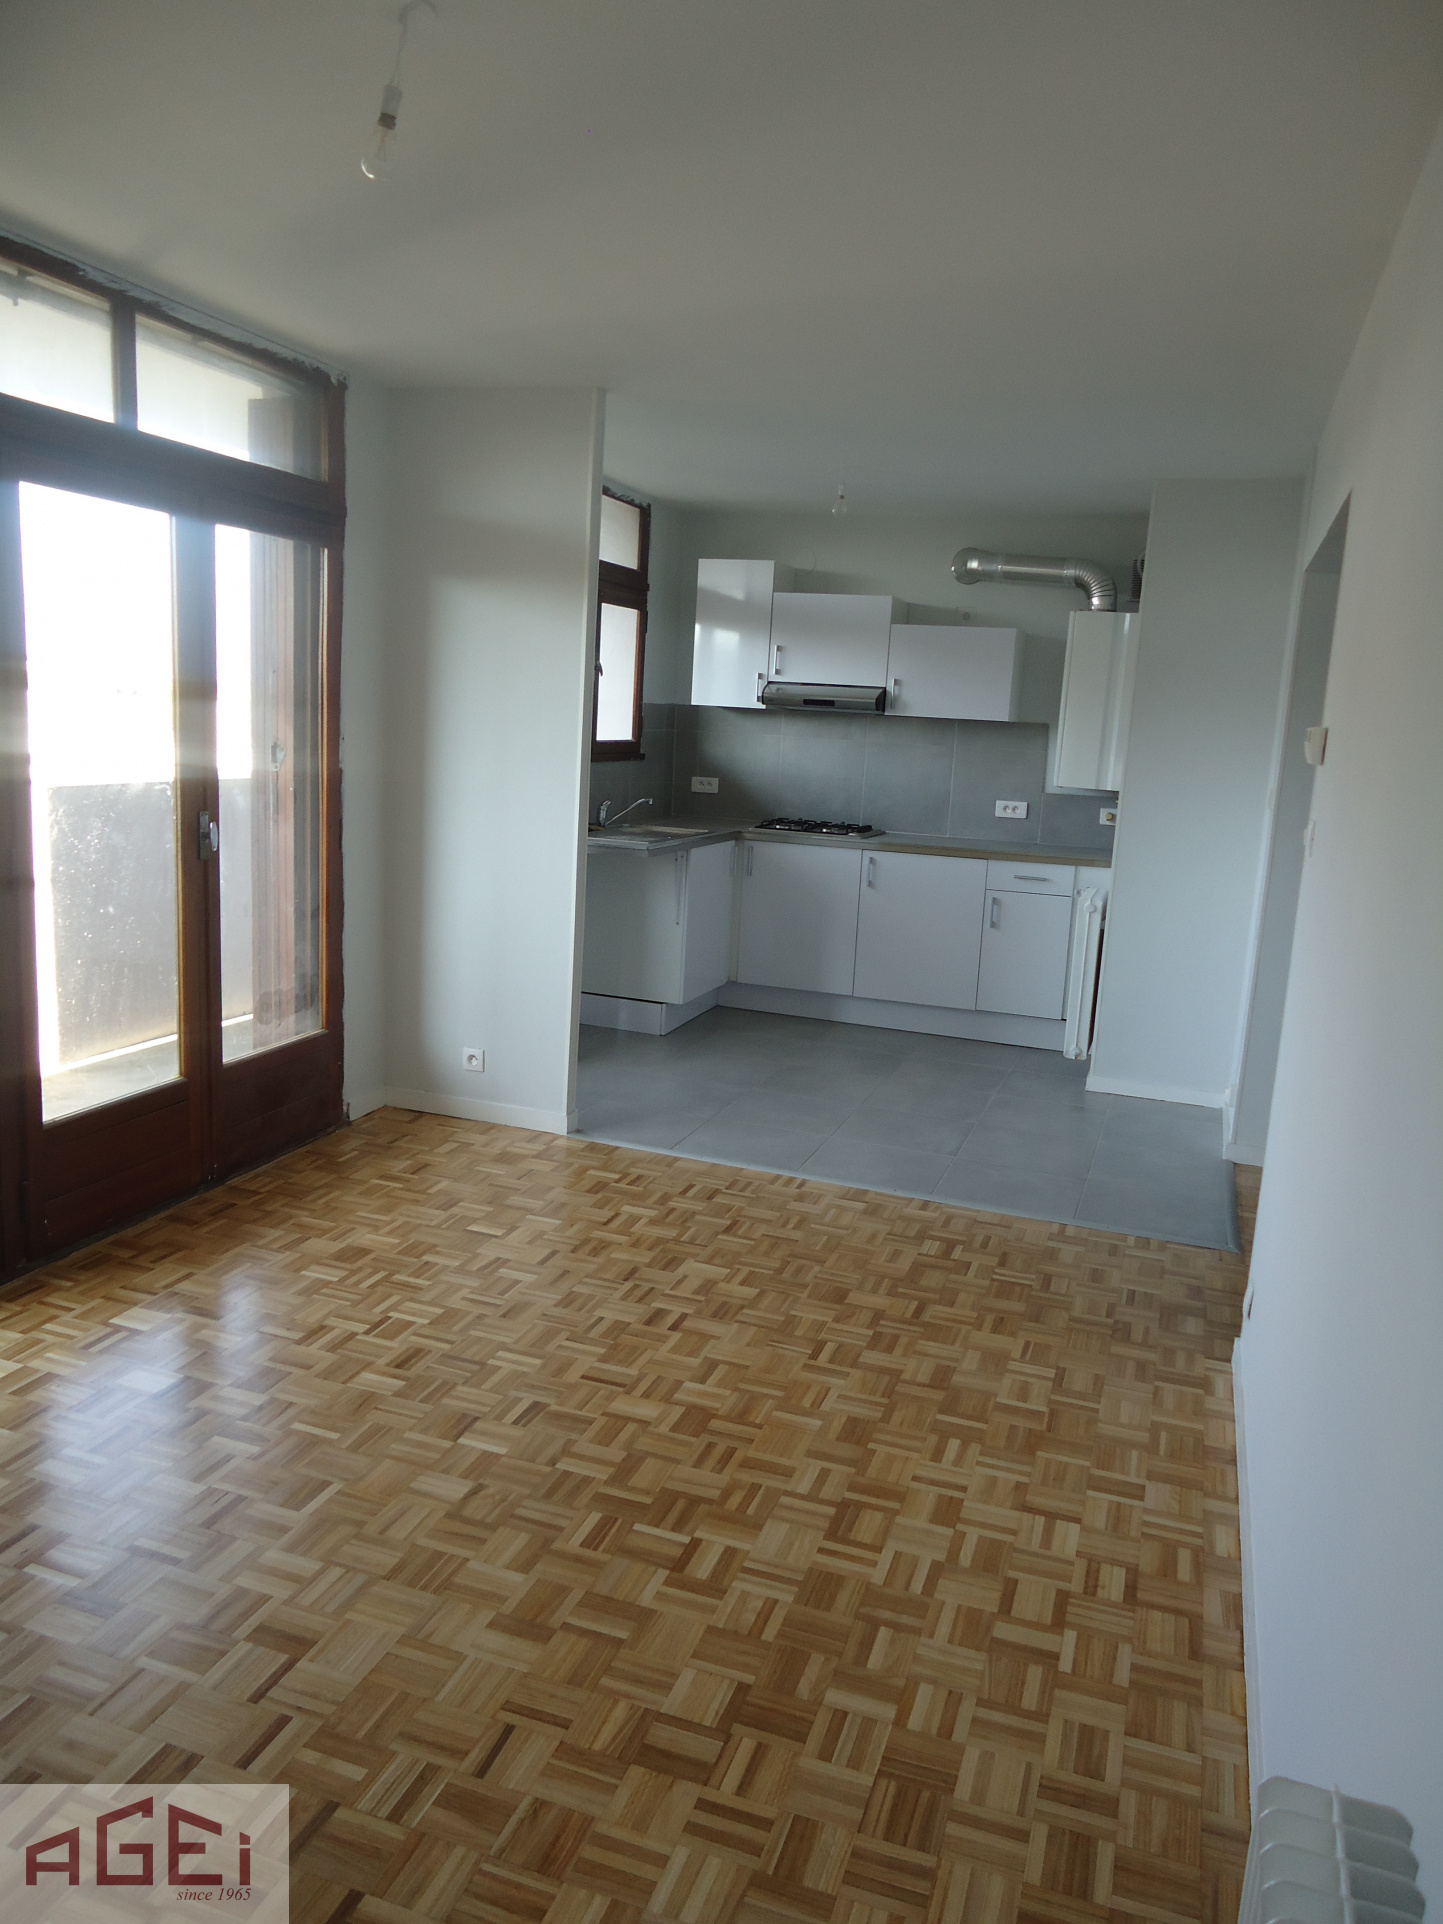 LOCATION-LAURA108-AGENCE-AGEI-Toulouse